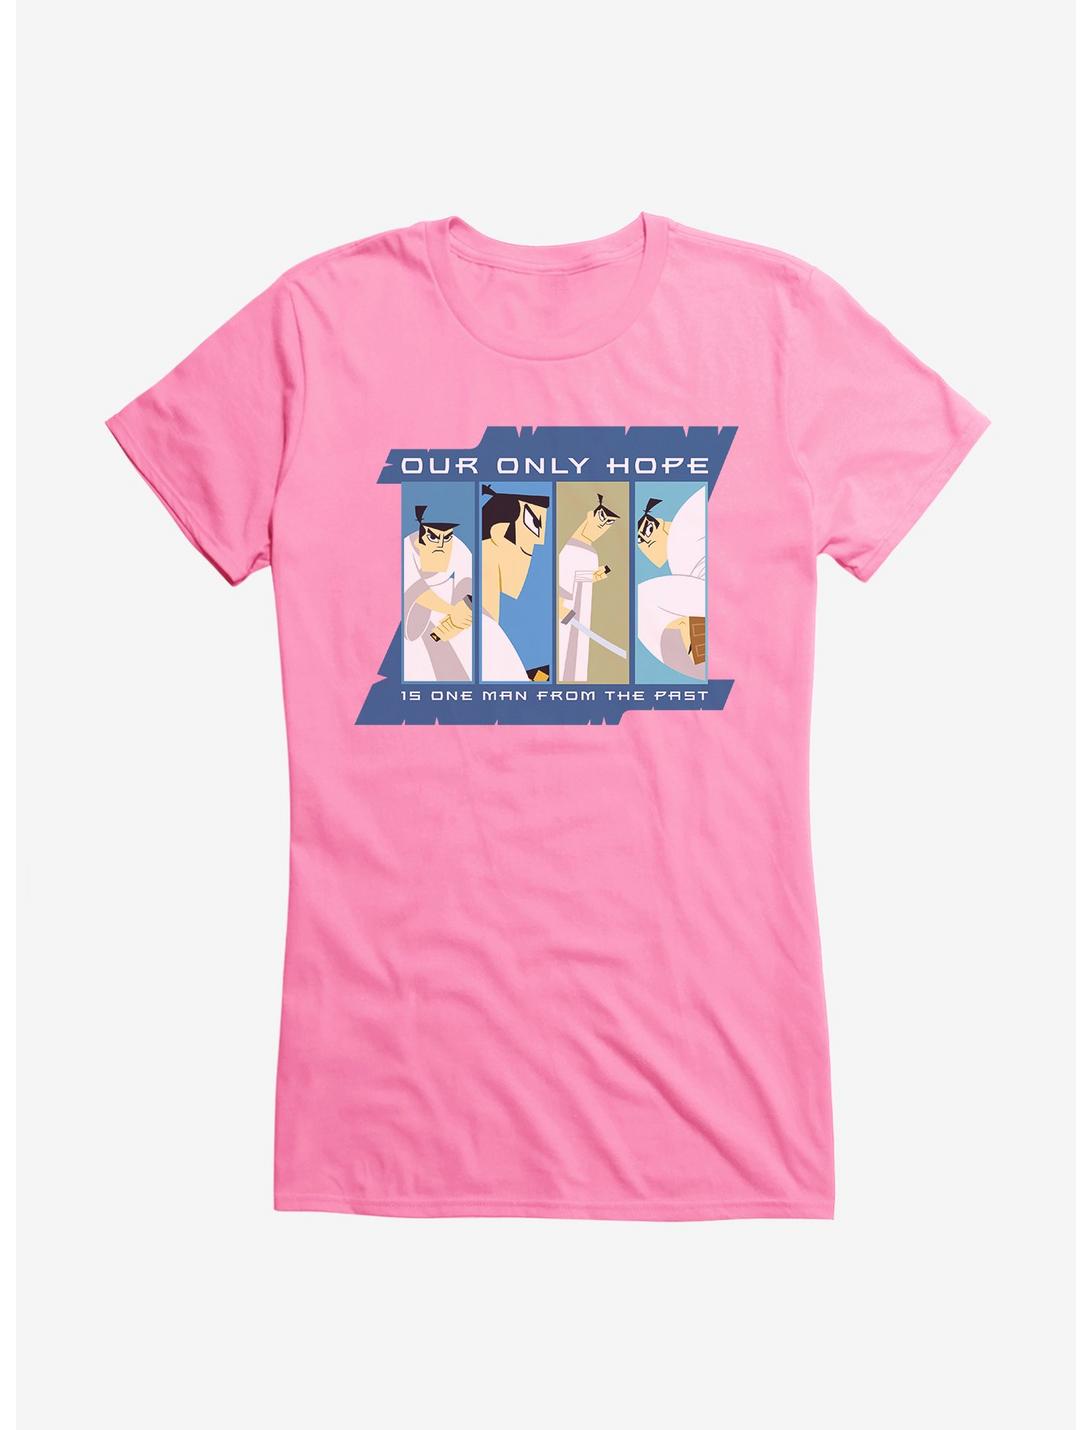 Samurai Jack Our Only Hope Girls T-Shirt, CHARITY PINK, hi-res